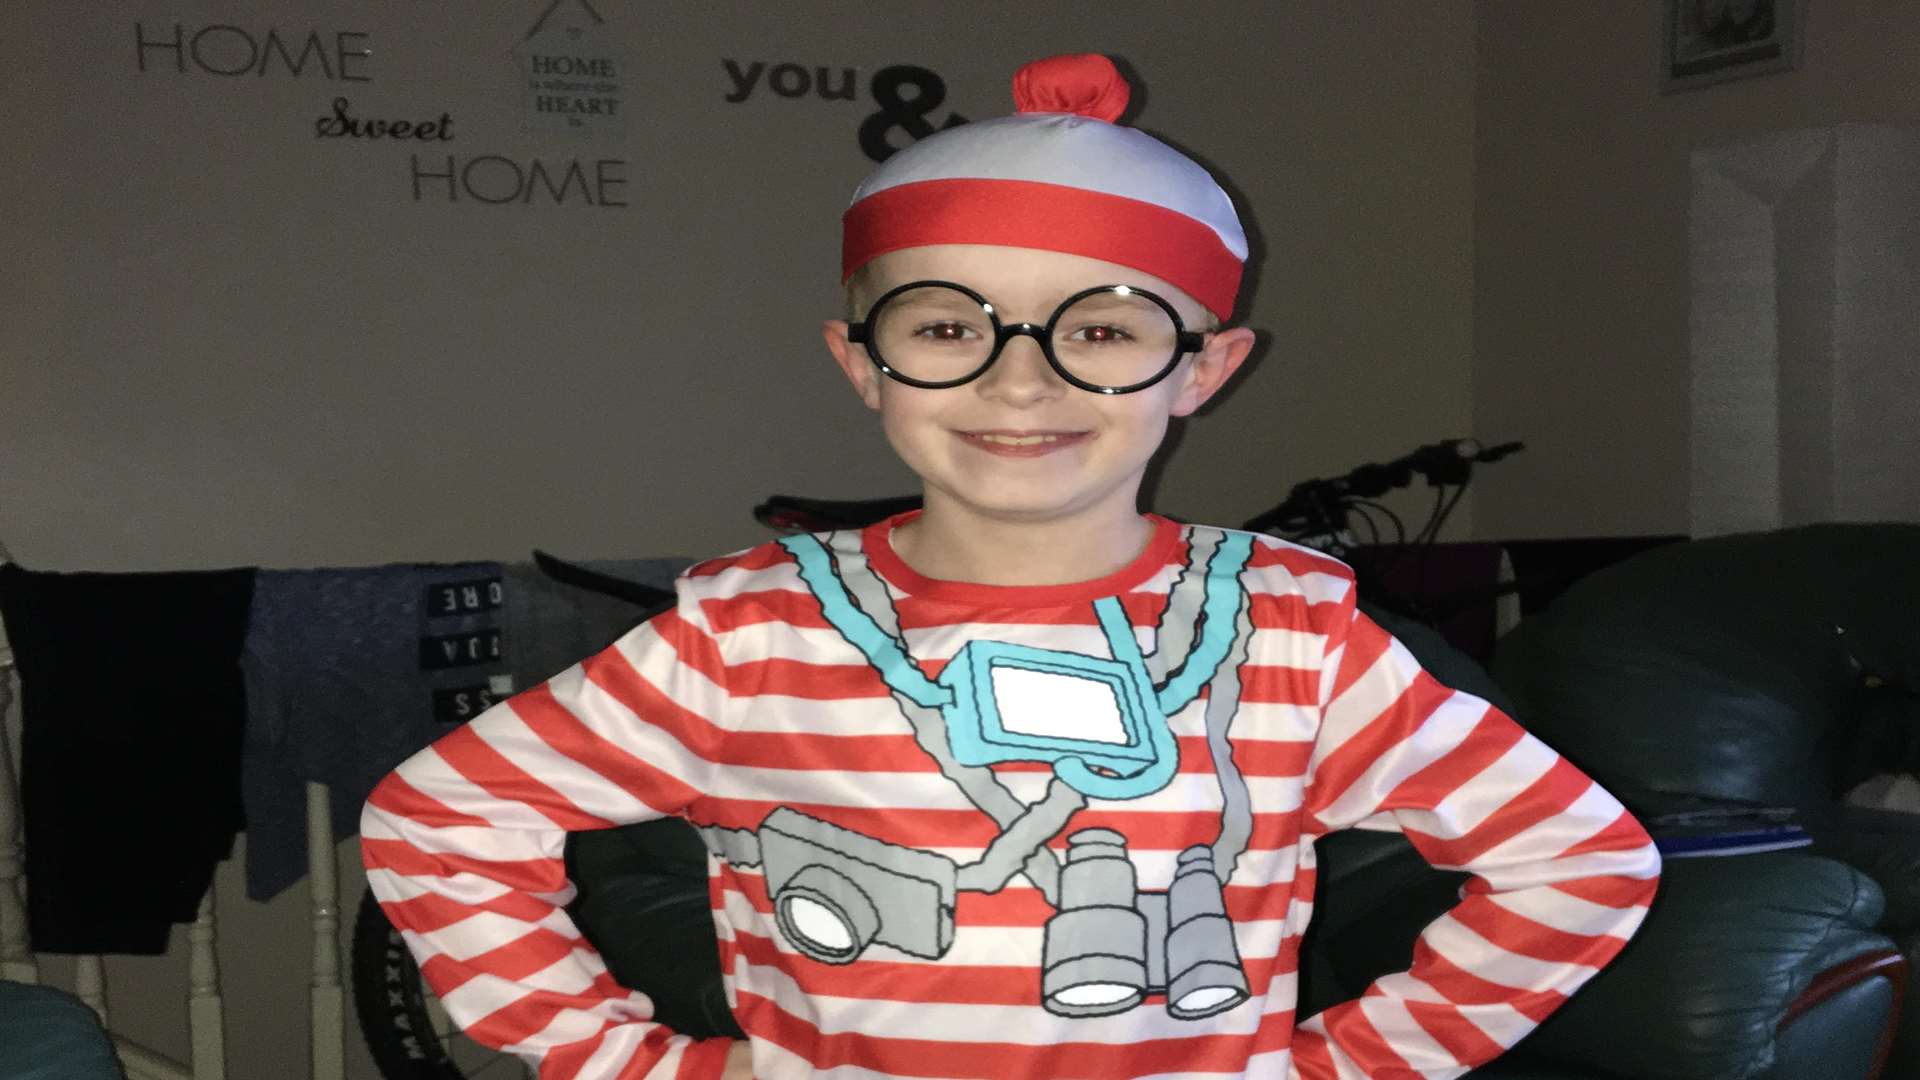 Lewis, age 8, as Where's Wally